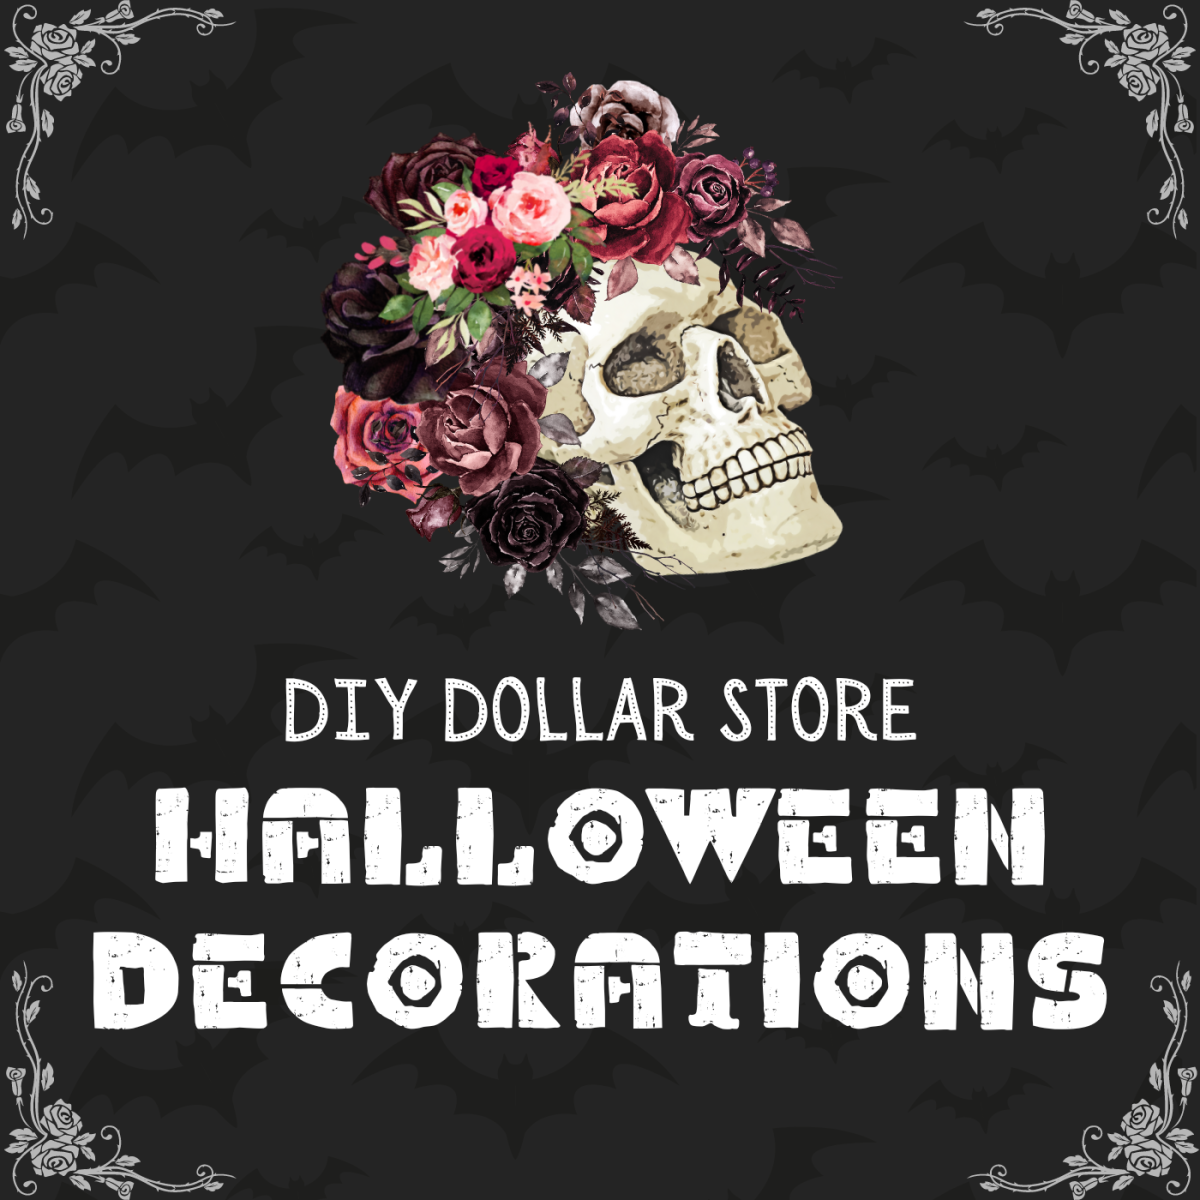 50+ DIY Dollar Store Halloween Decorations to Creep Your Guests Out